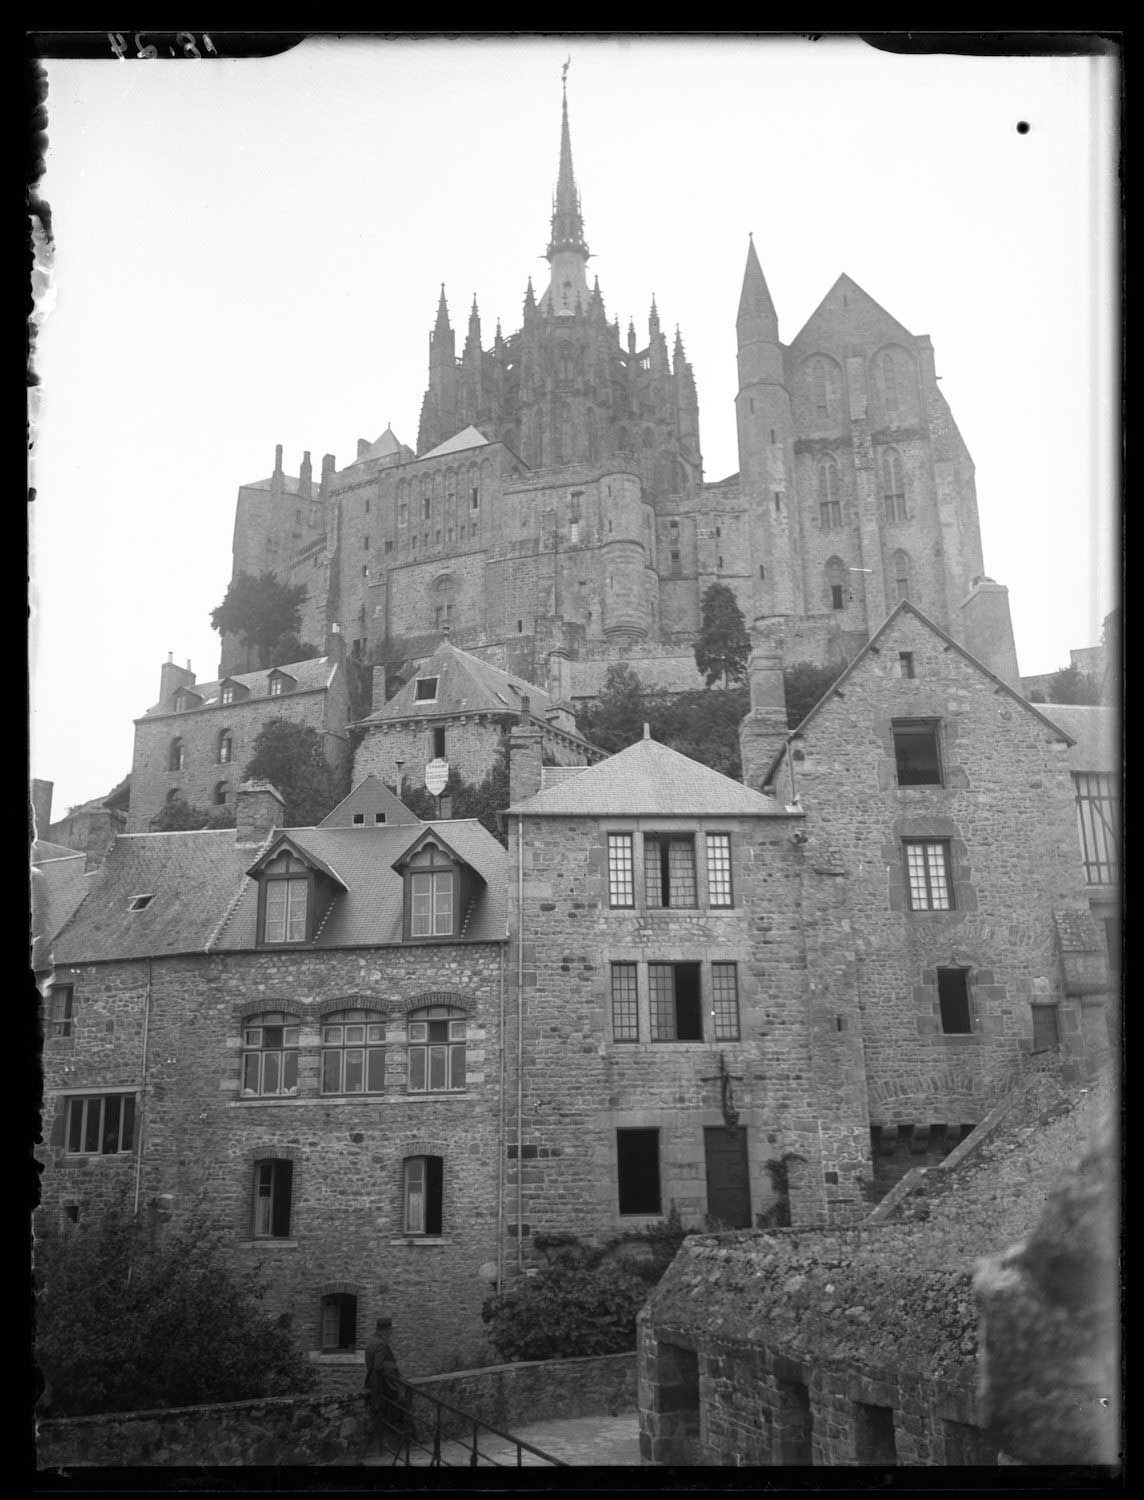 Mont Saint-Michel - View of the Abbey of Mont Saint-Michel viewed from a street in town below.